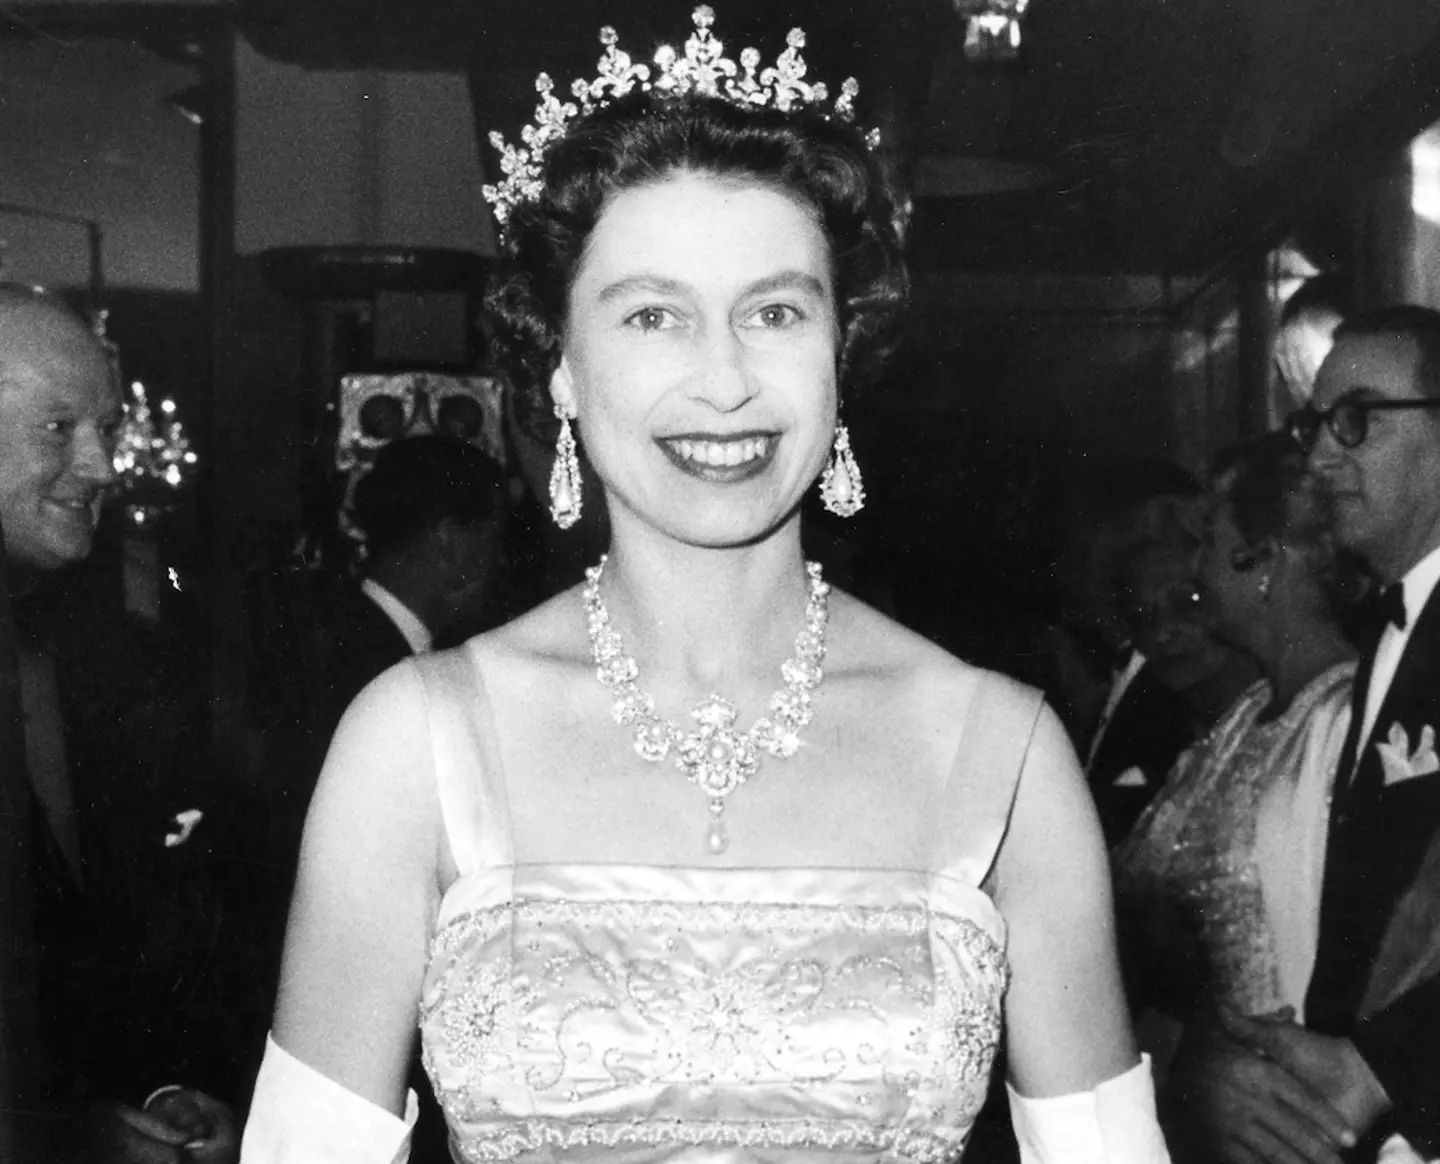 Queen Elizabeth II spent more than 70 years on the throne.